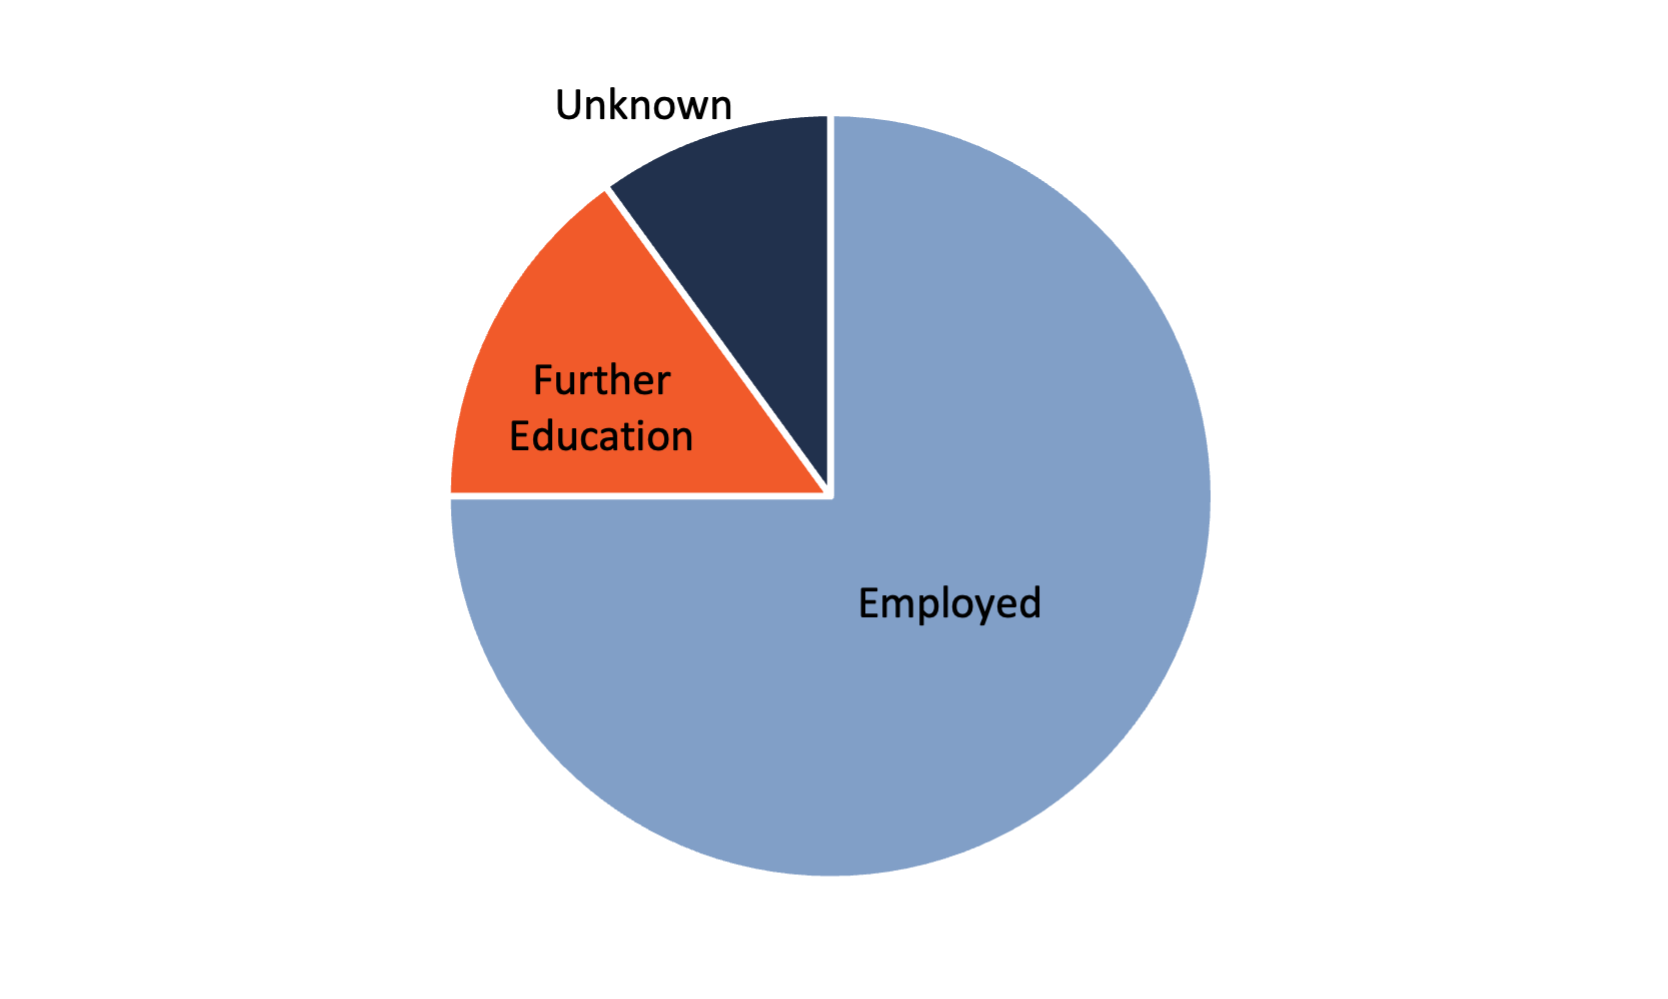 Pie chart with labels for each section of where students go after graduation